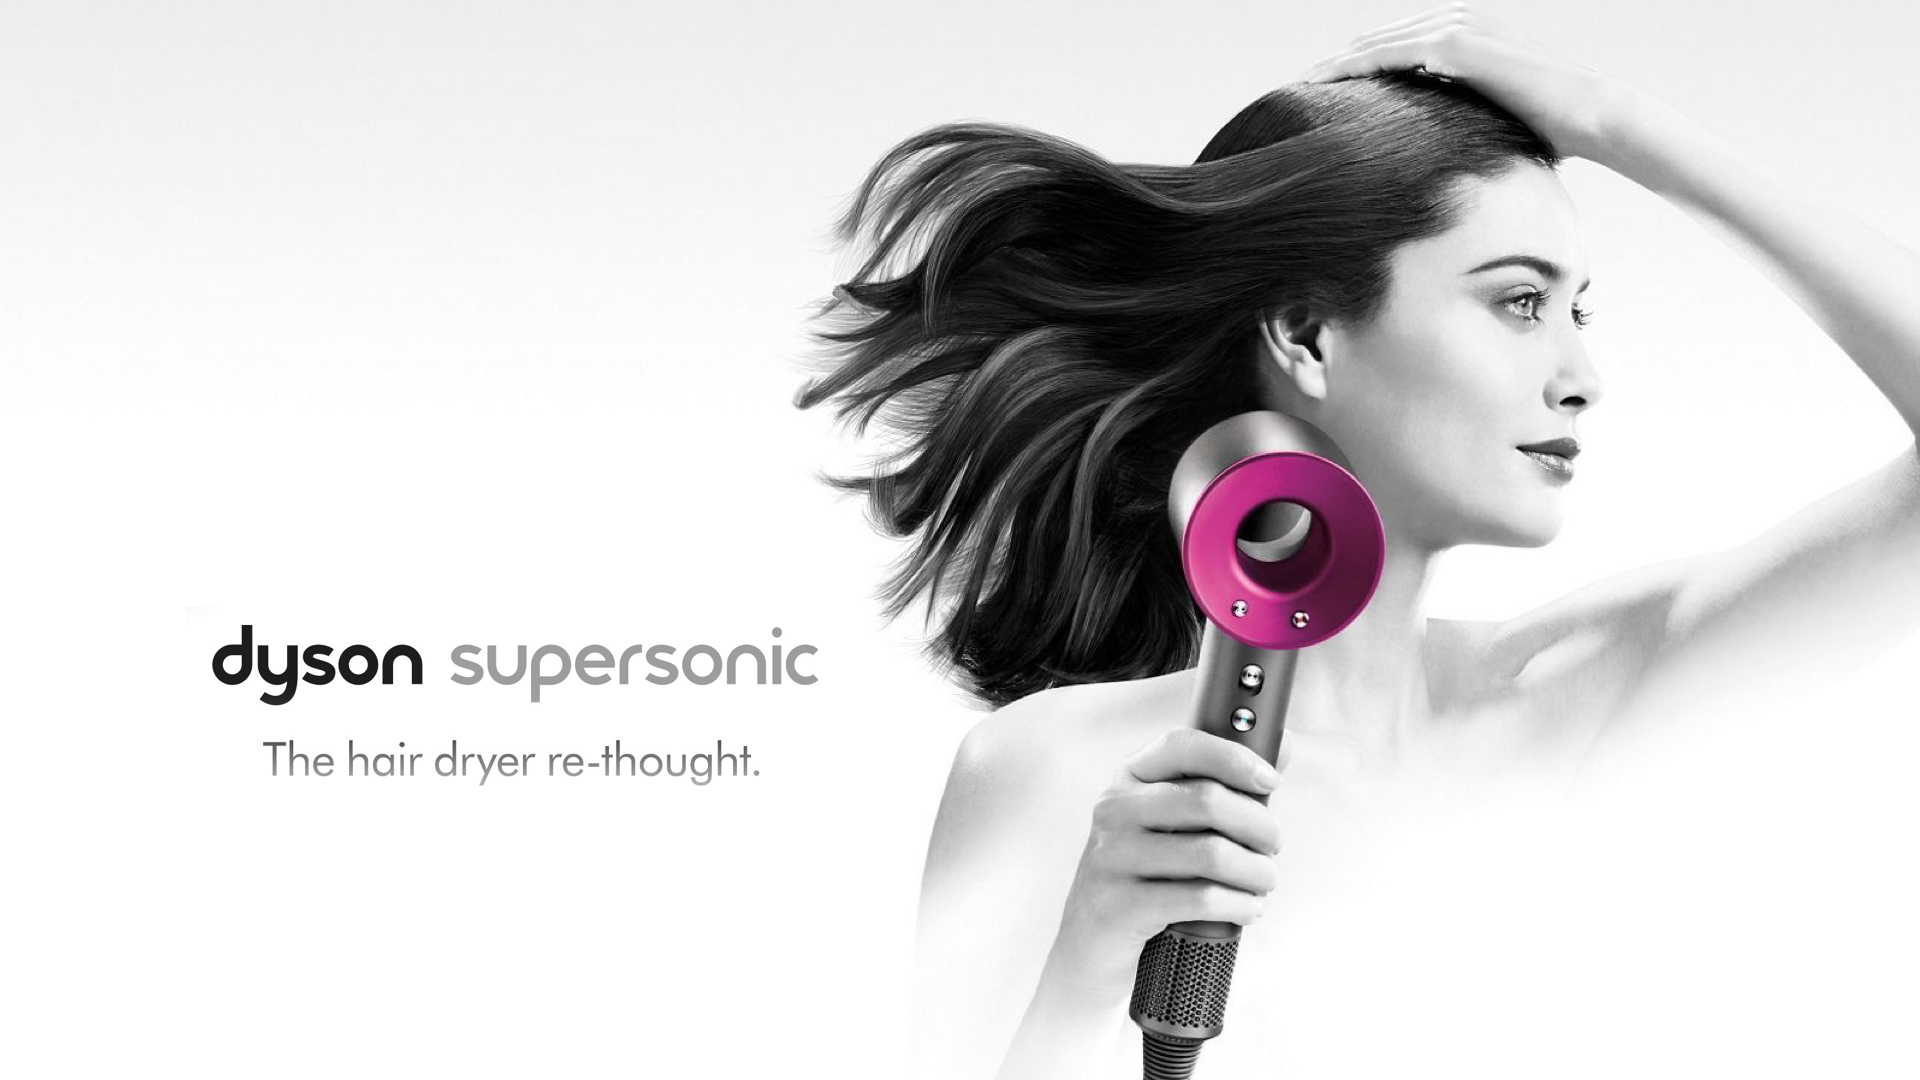 Dyson Supersonic Hair Dryer is here - Rodney Wayne